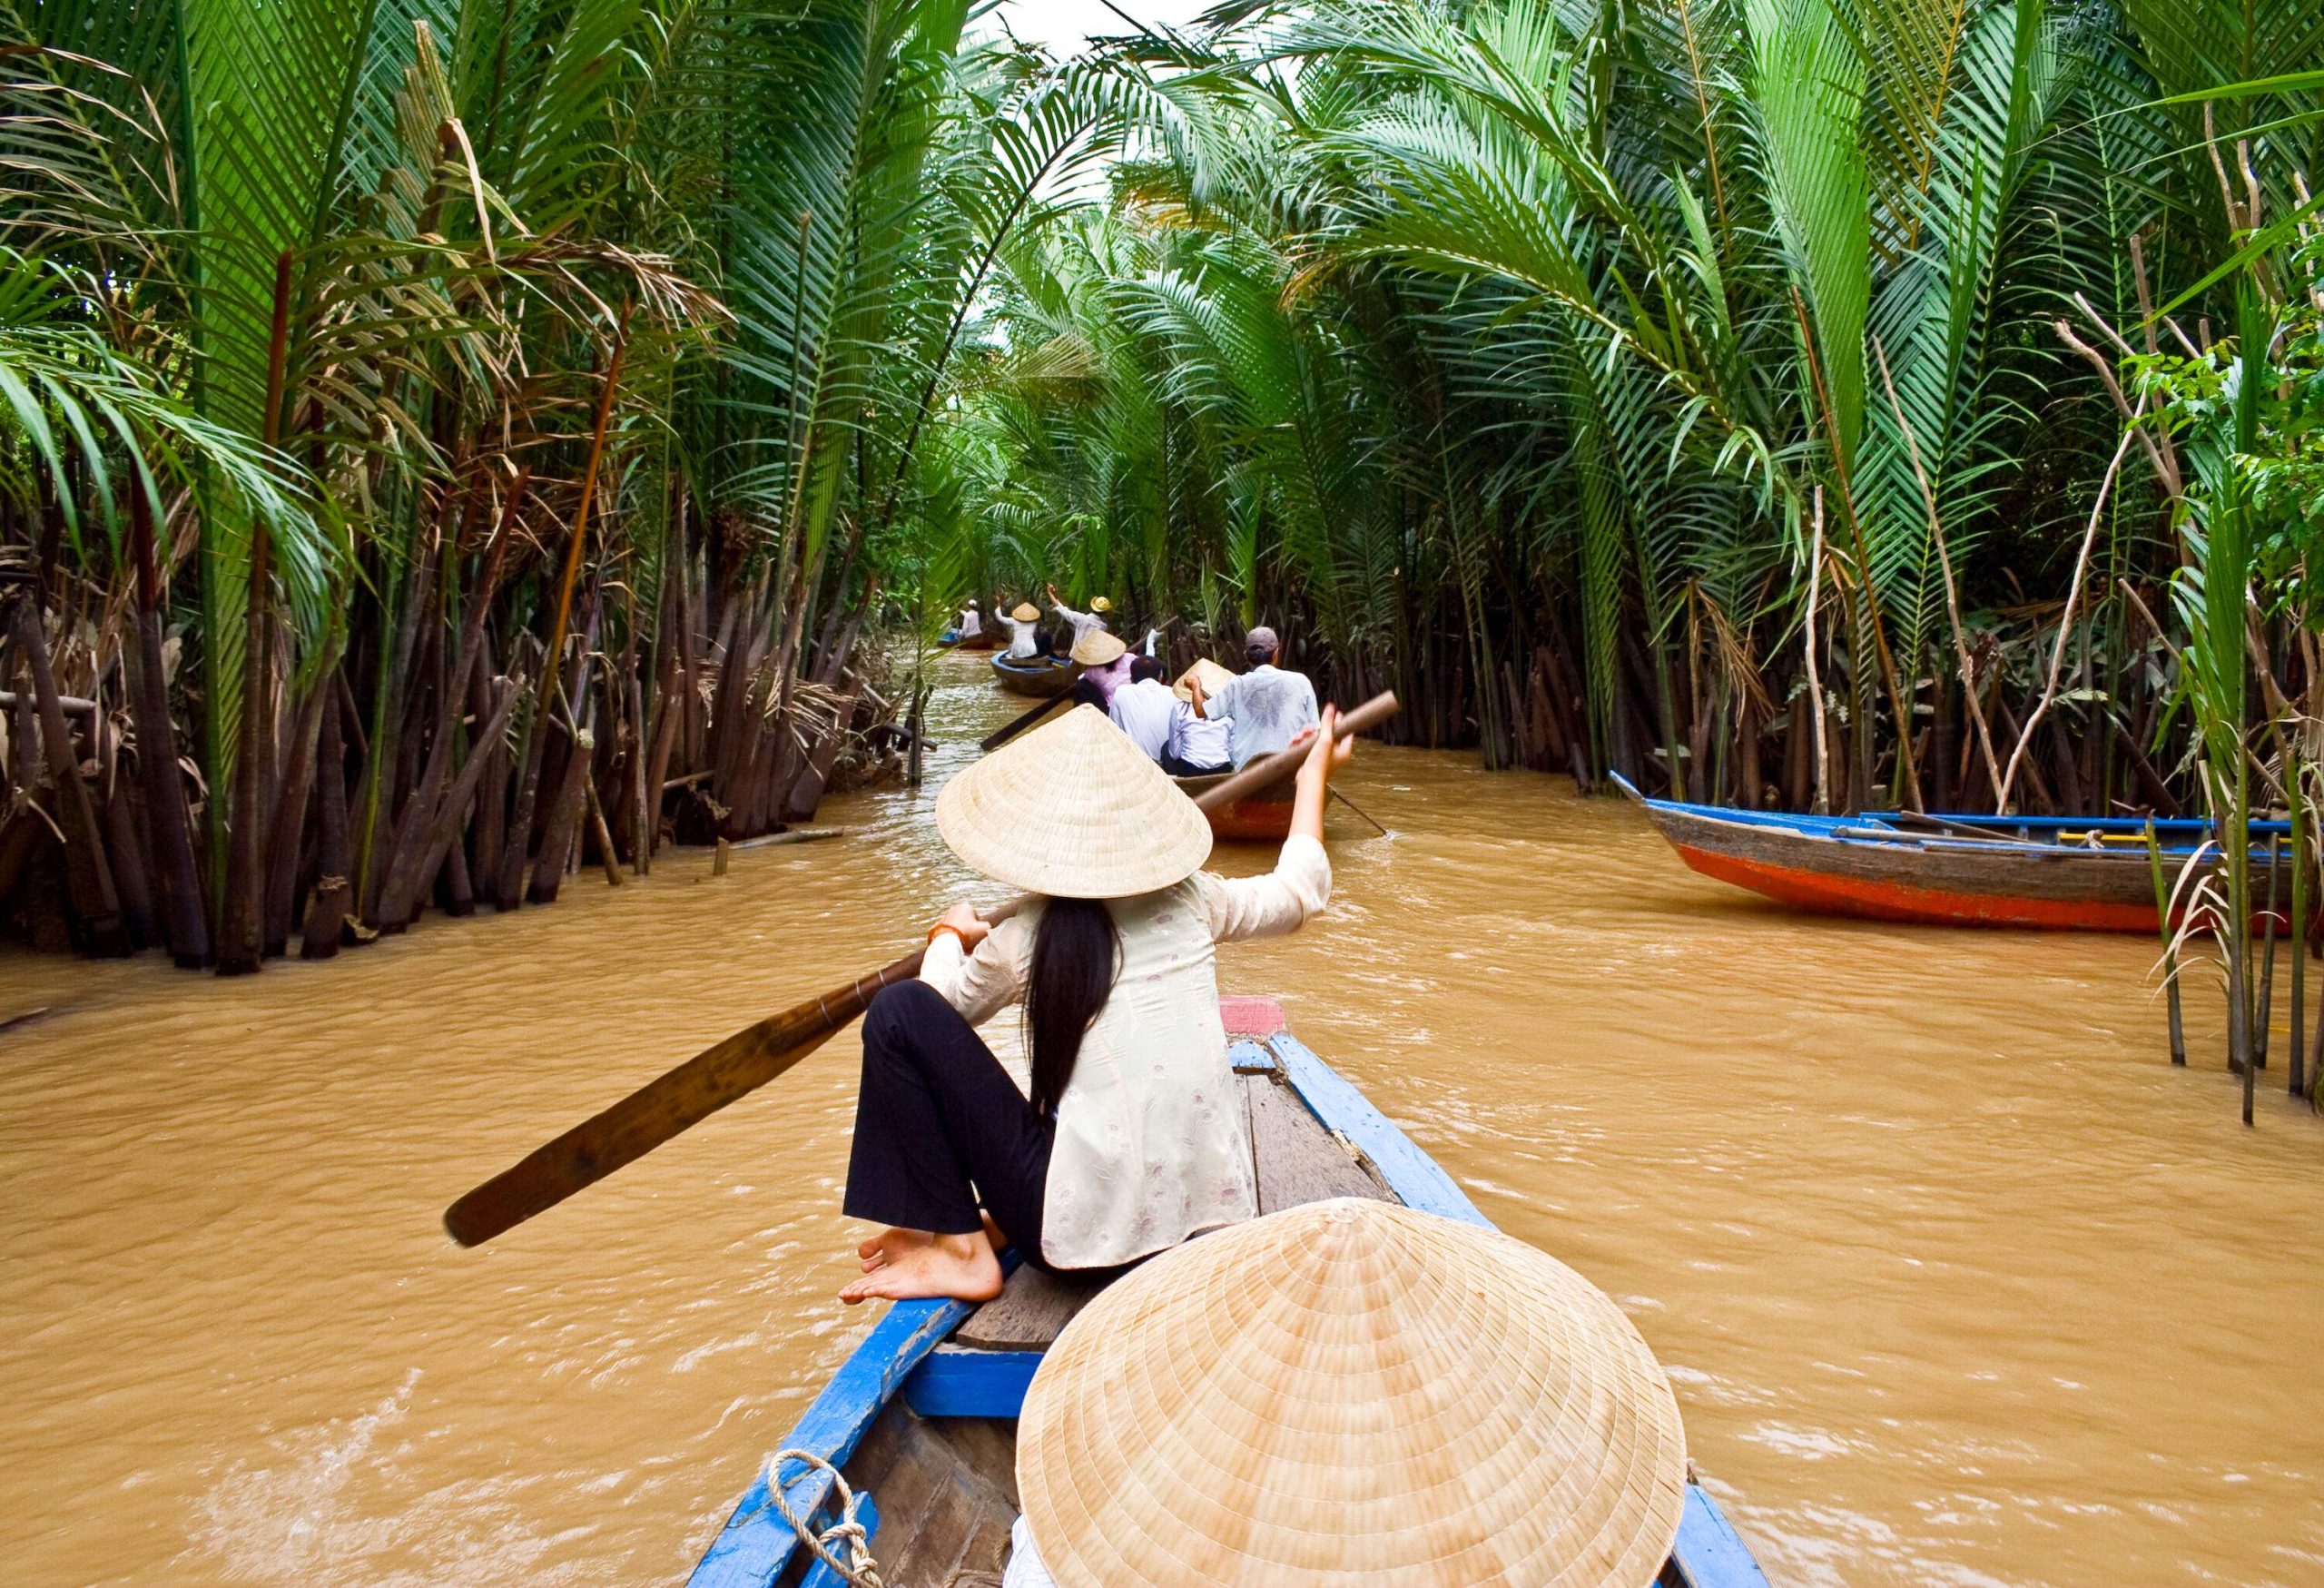 Individuals leisurely paddle on their wooden boats along a muddy river, enveloped by verdant foliage.